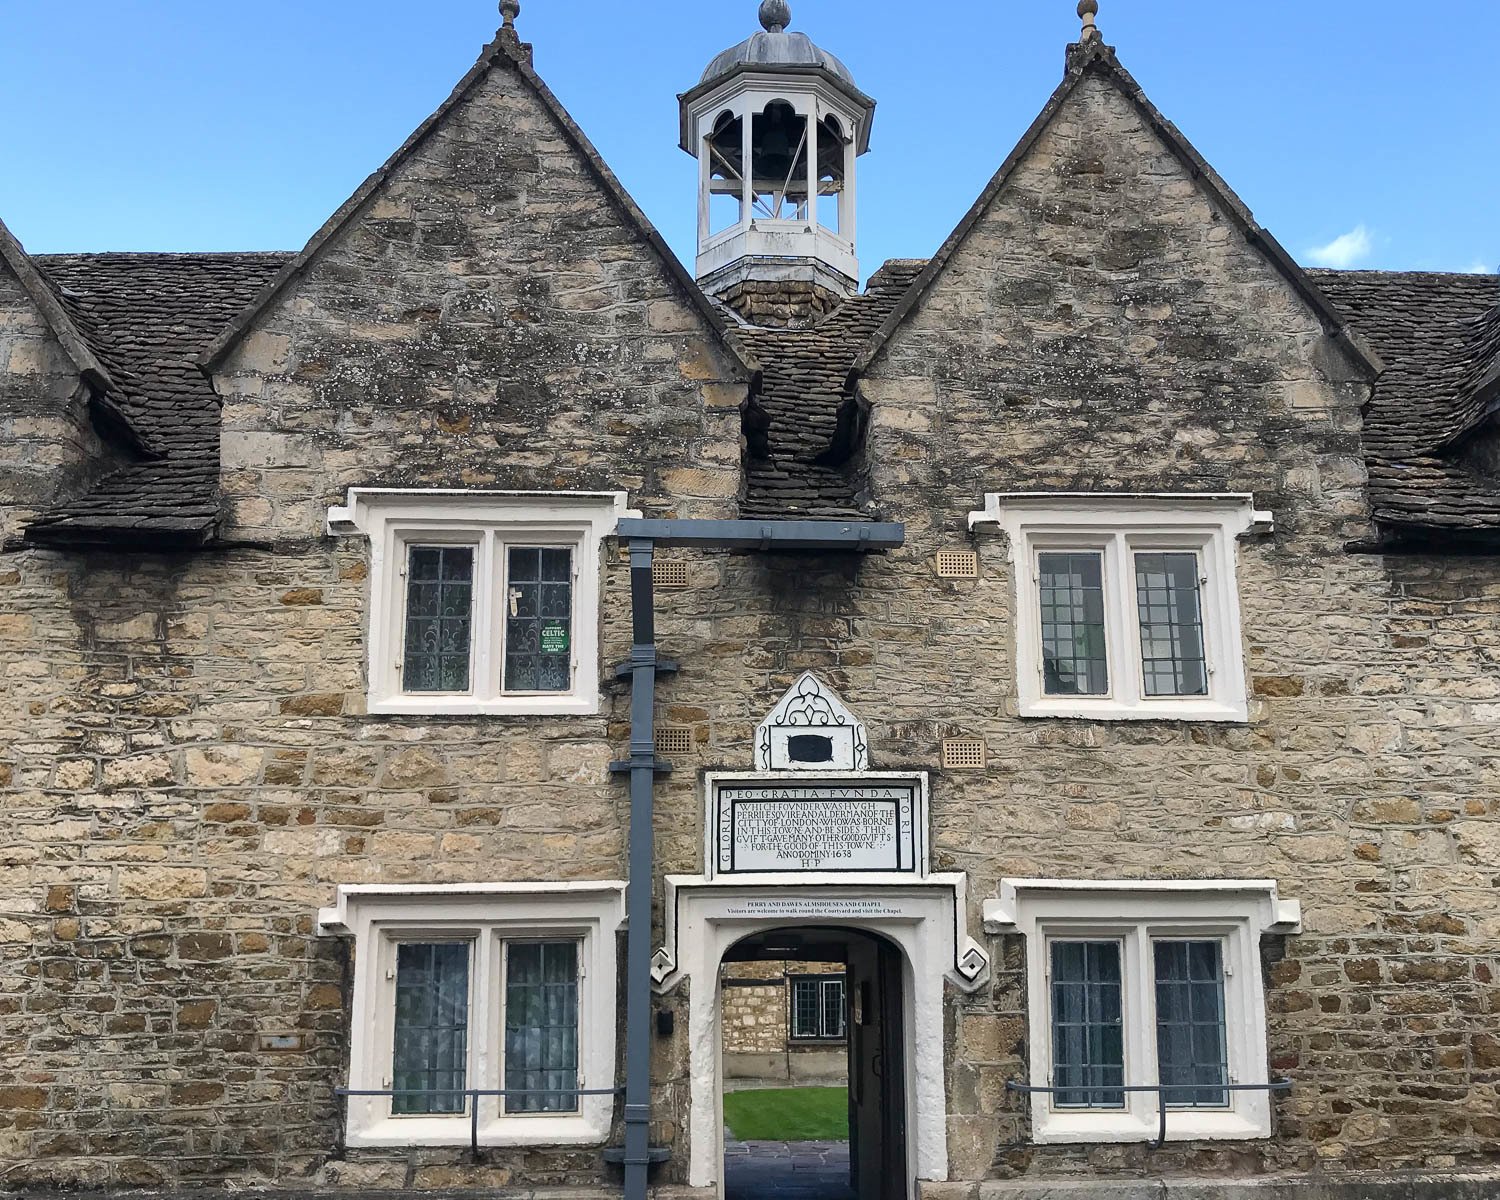 Almshouse at Wotton-under-edge on the Cotswold Way